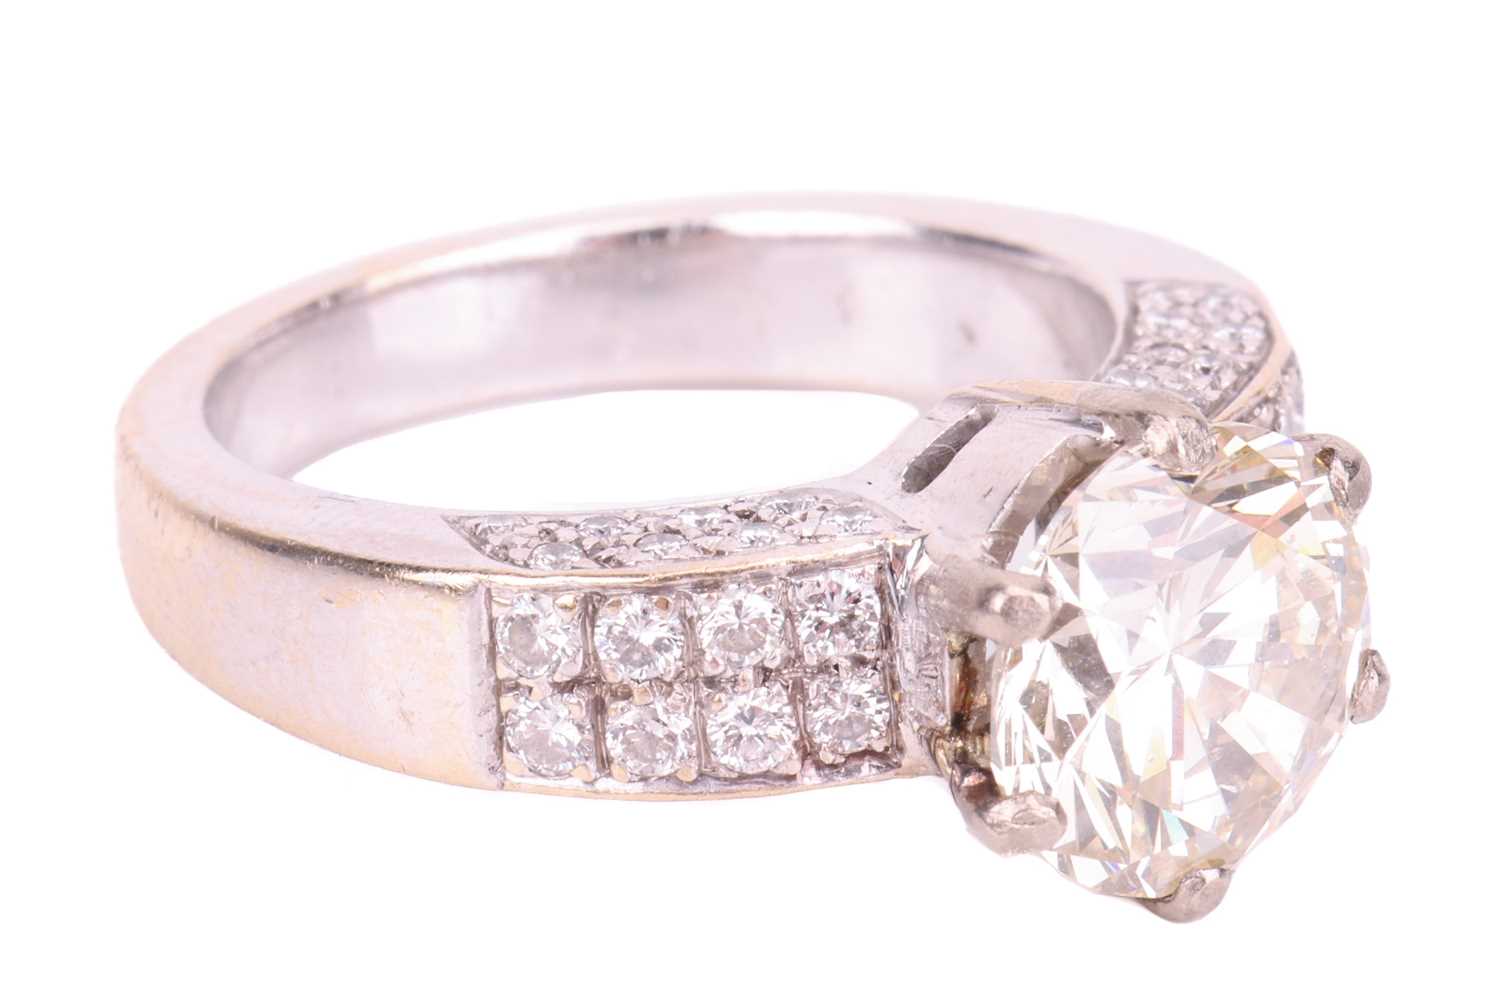 A diamond solitaire ring with diamond set shoulders, featuring a 3.02ct round brilliant cut diamond  - Image 2 of 5